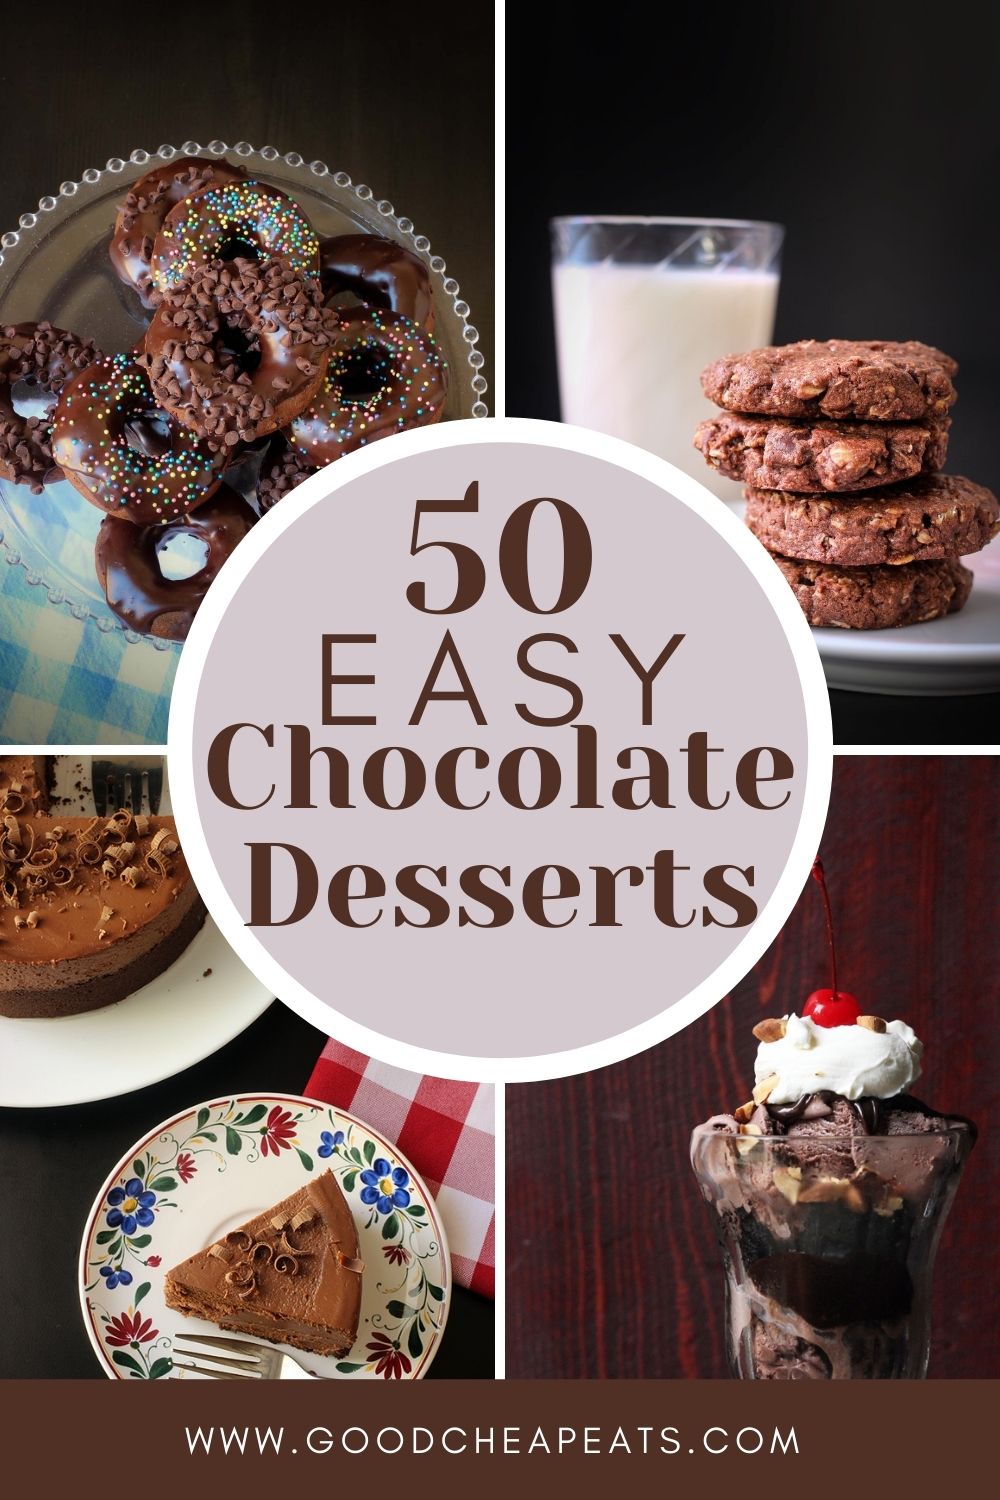 50+ Quick & Easy Chocolate Desserts - Good Cheap Eats